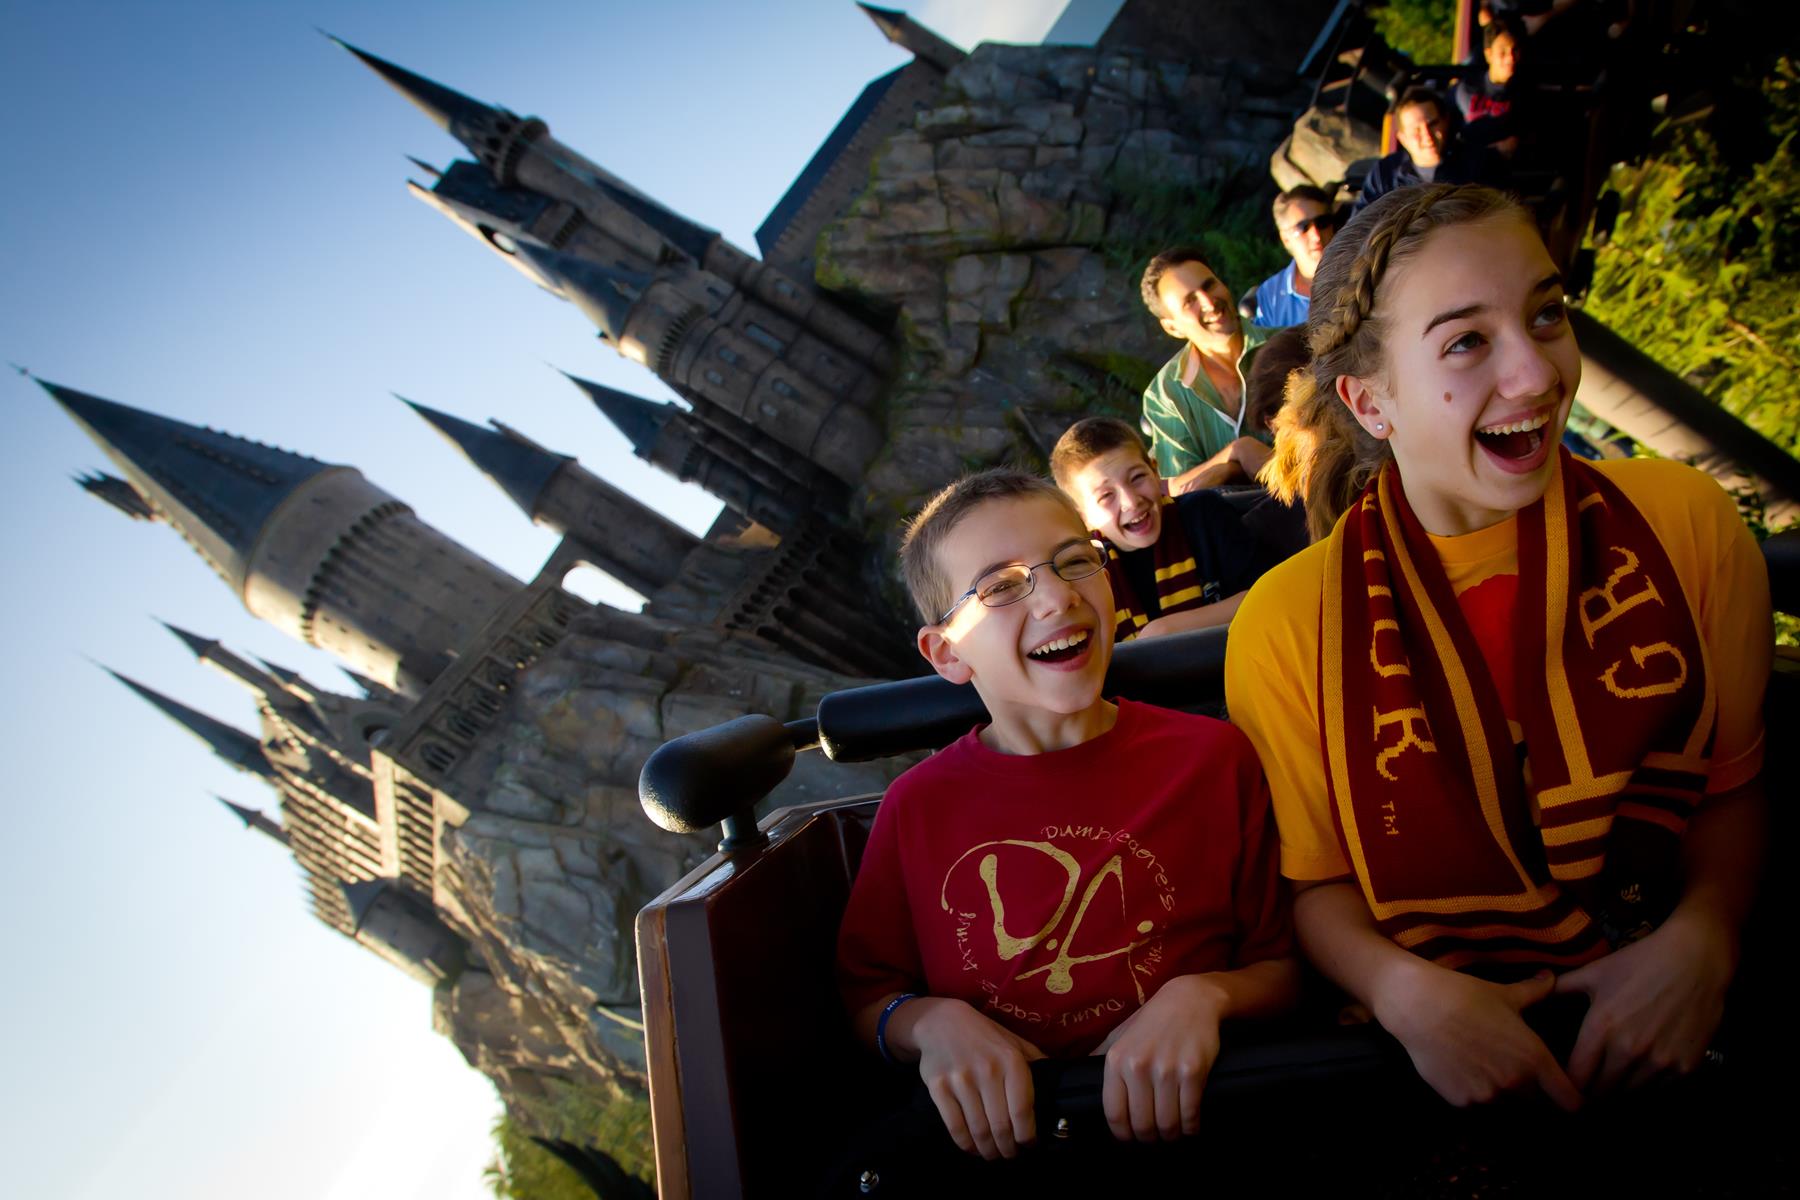 Flight of the Hippogriff at The Wizarding World of Harry Potter at Universal Orlando